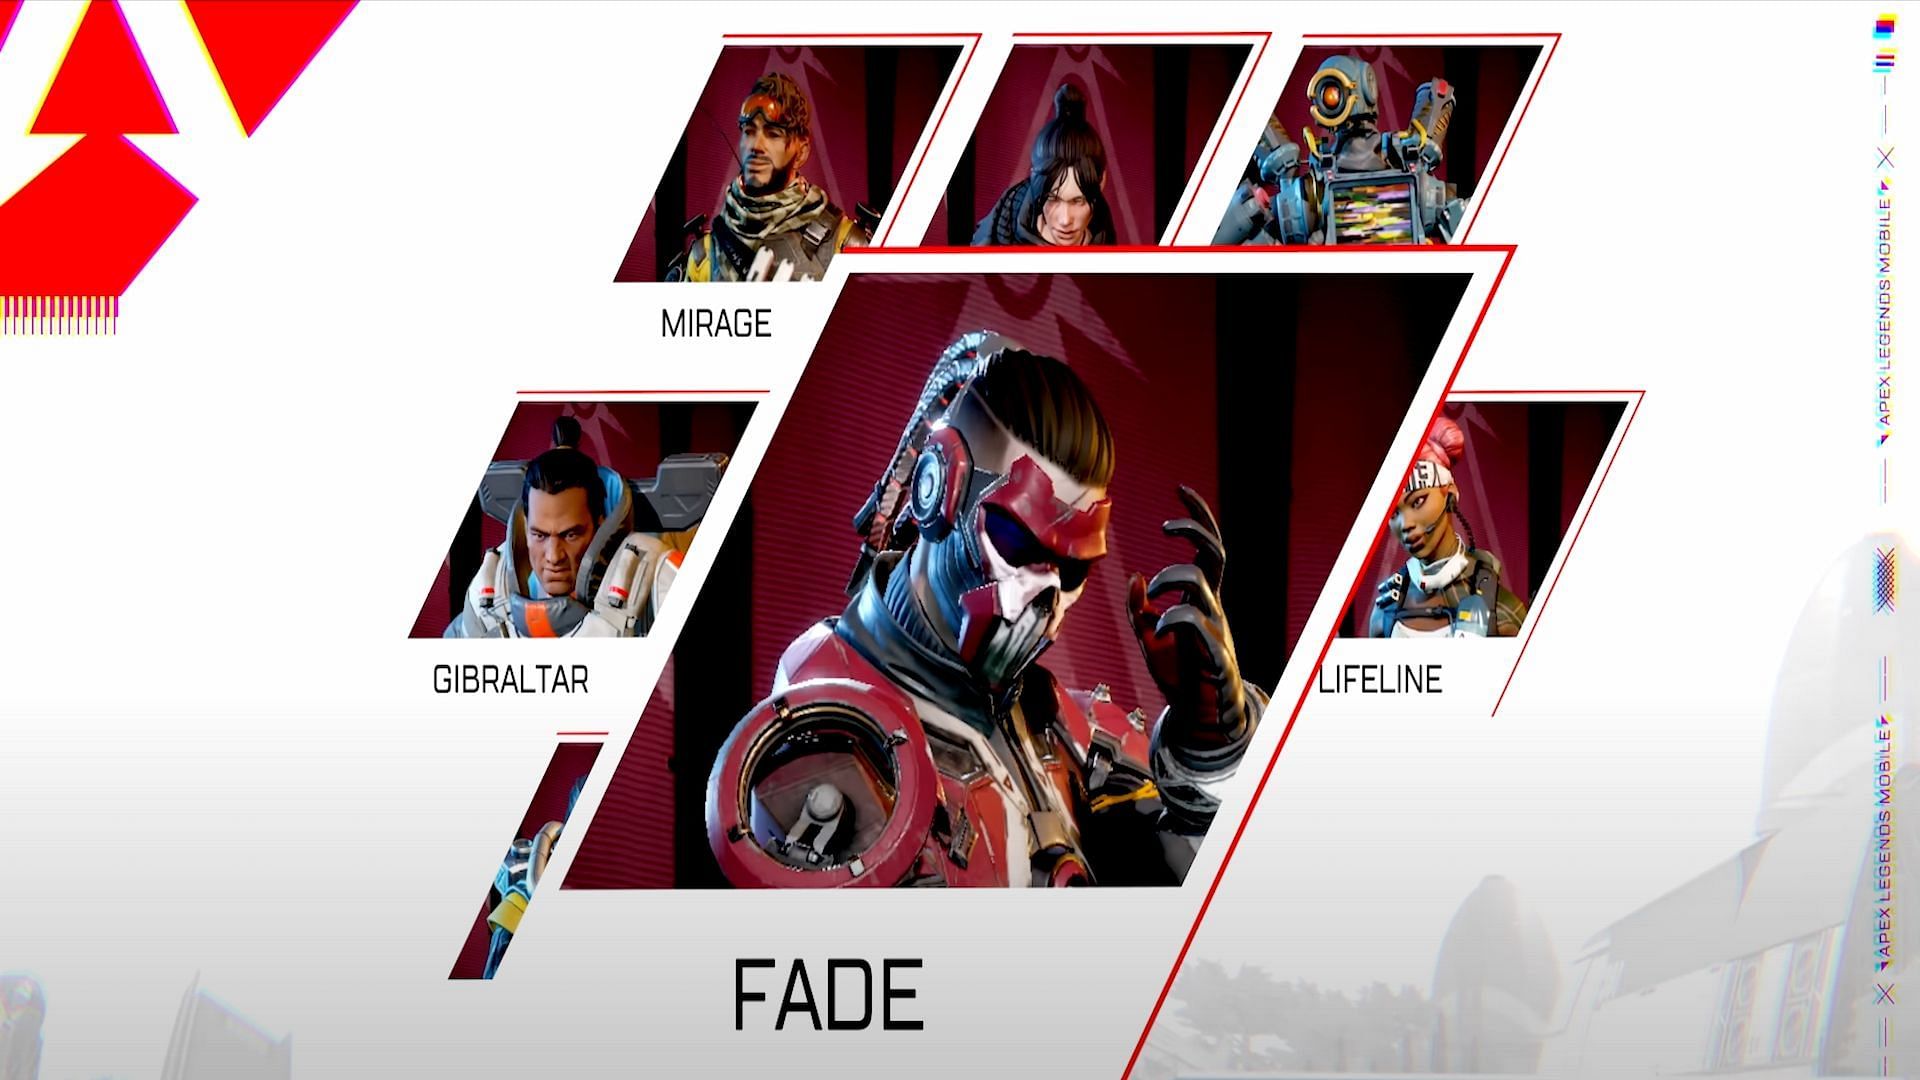 Apex Legends Mobile Players Can Now Play Fade Free For A Limited